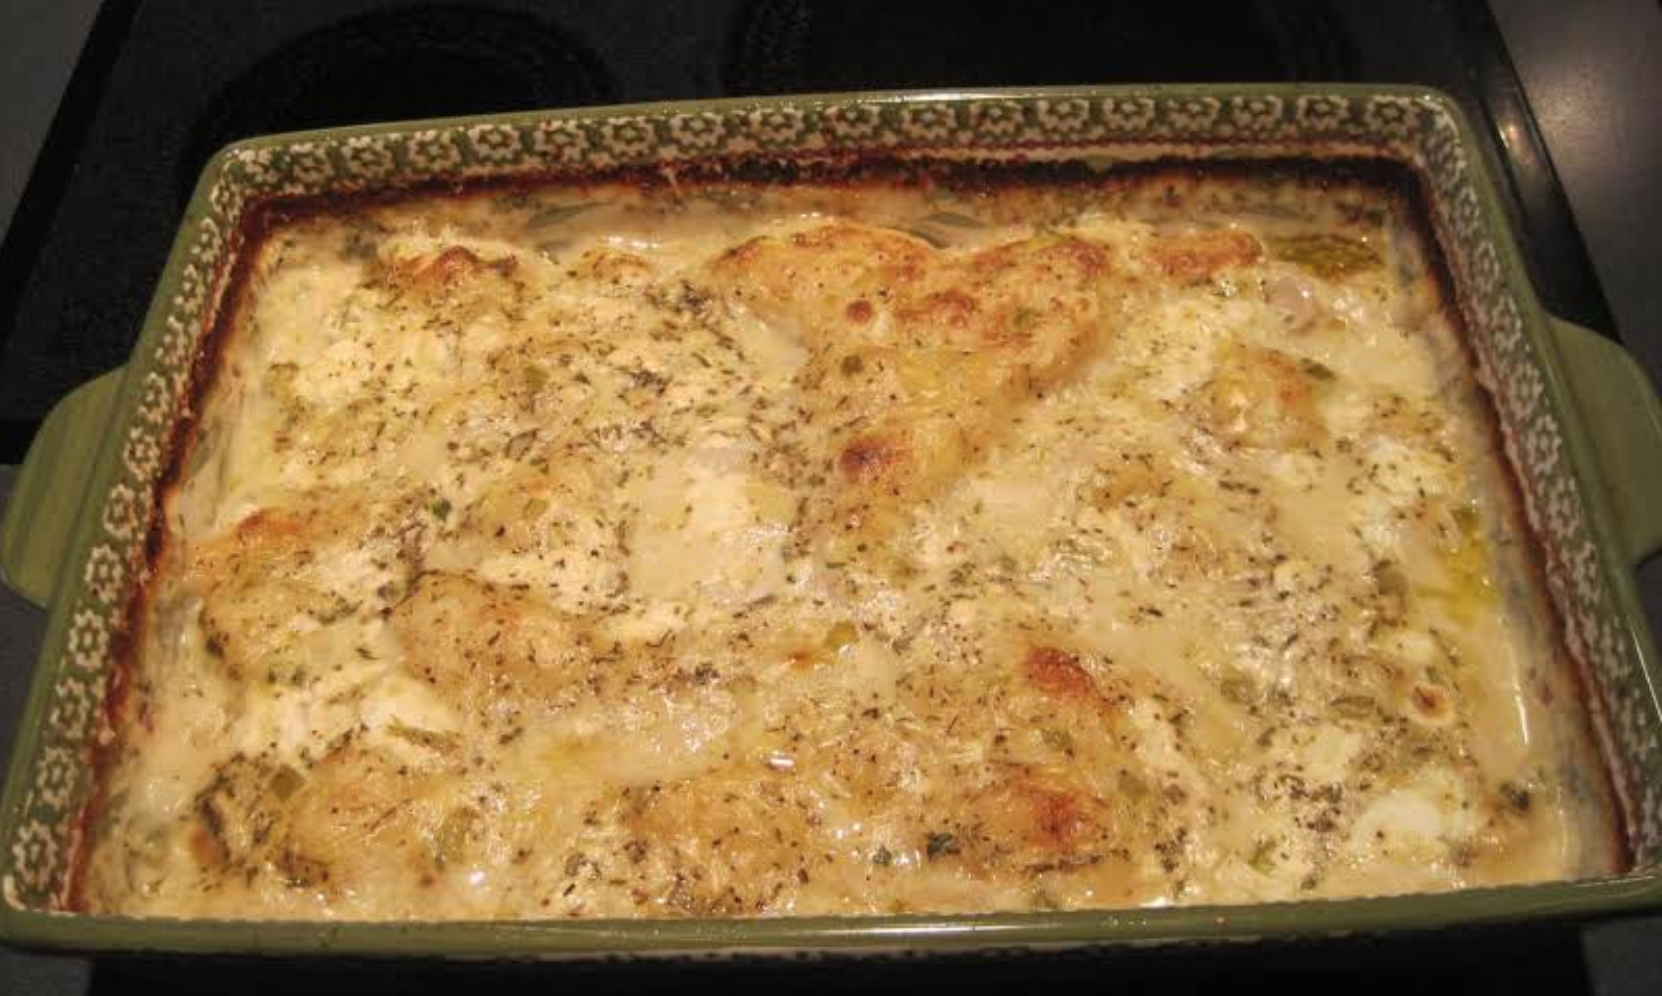 Baked Chicken and Dumplings